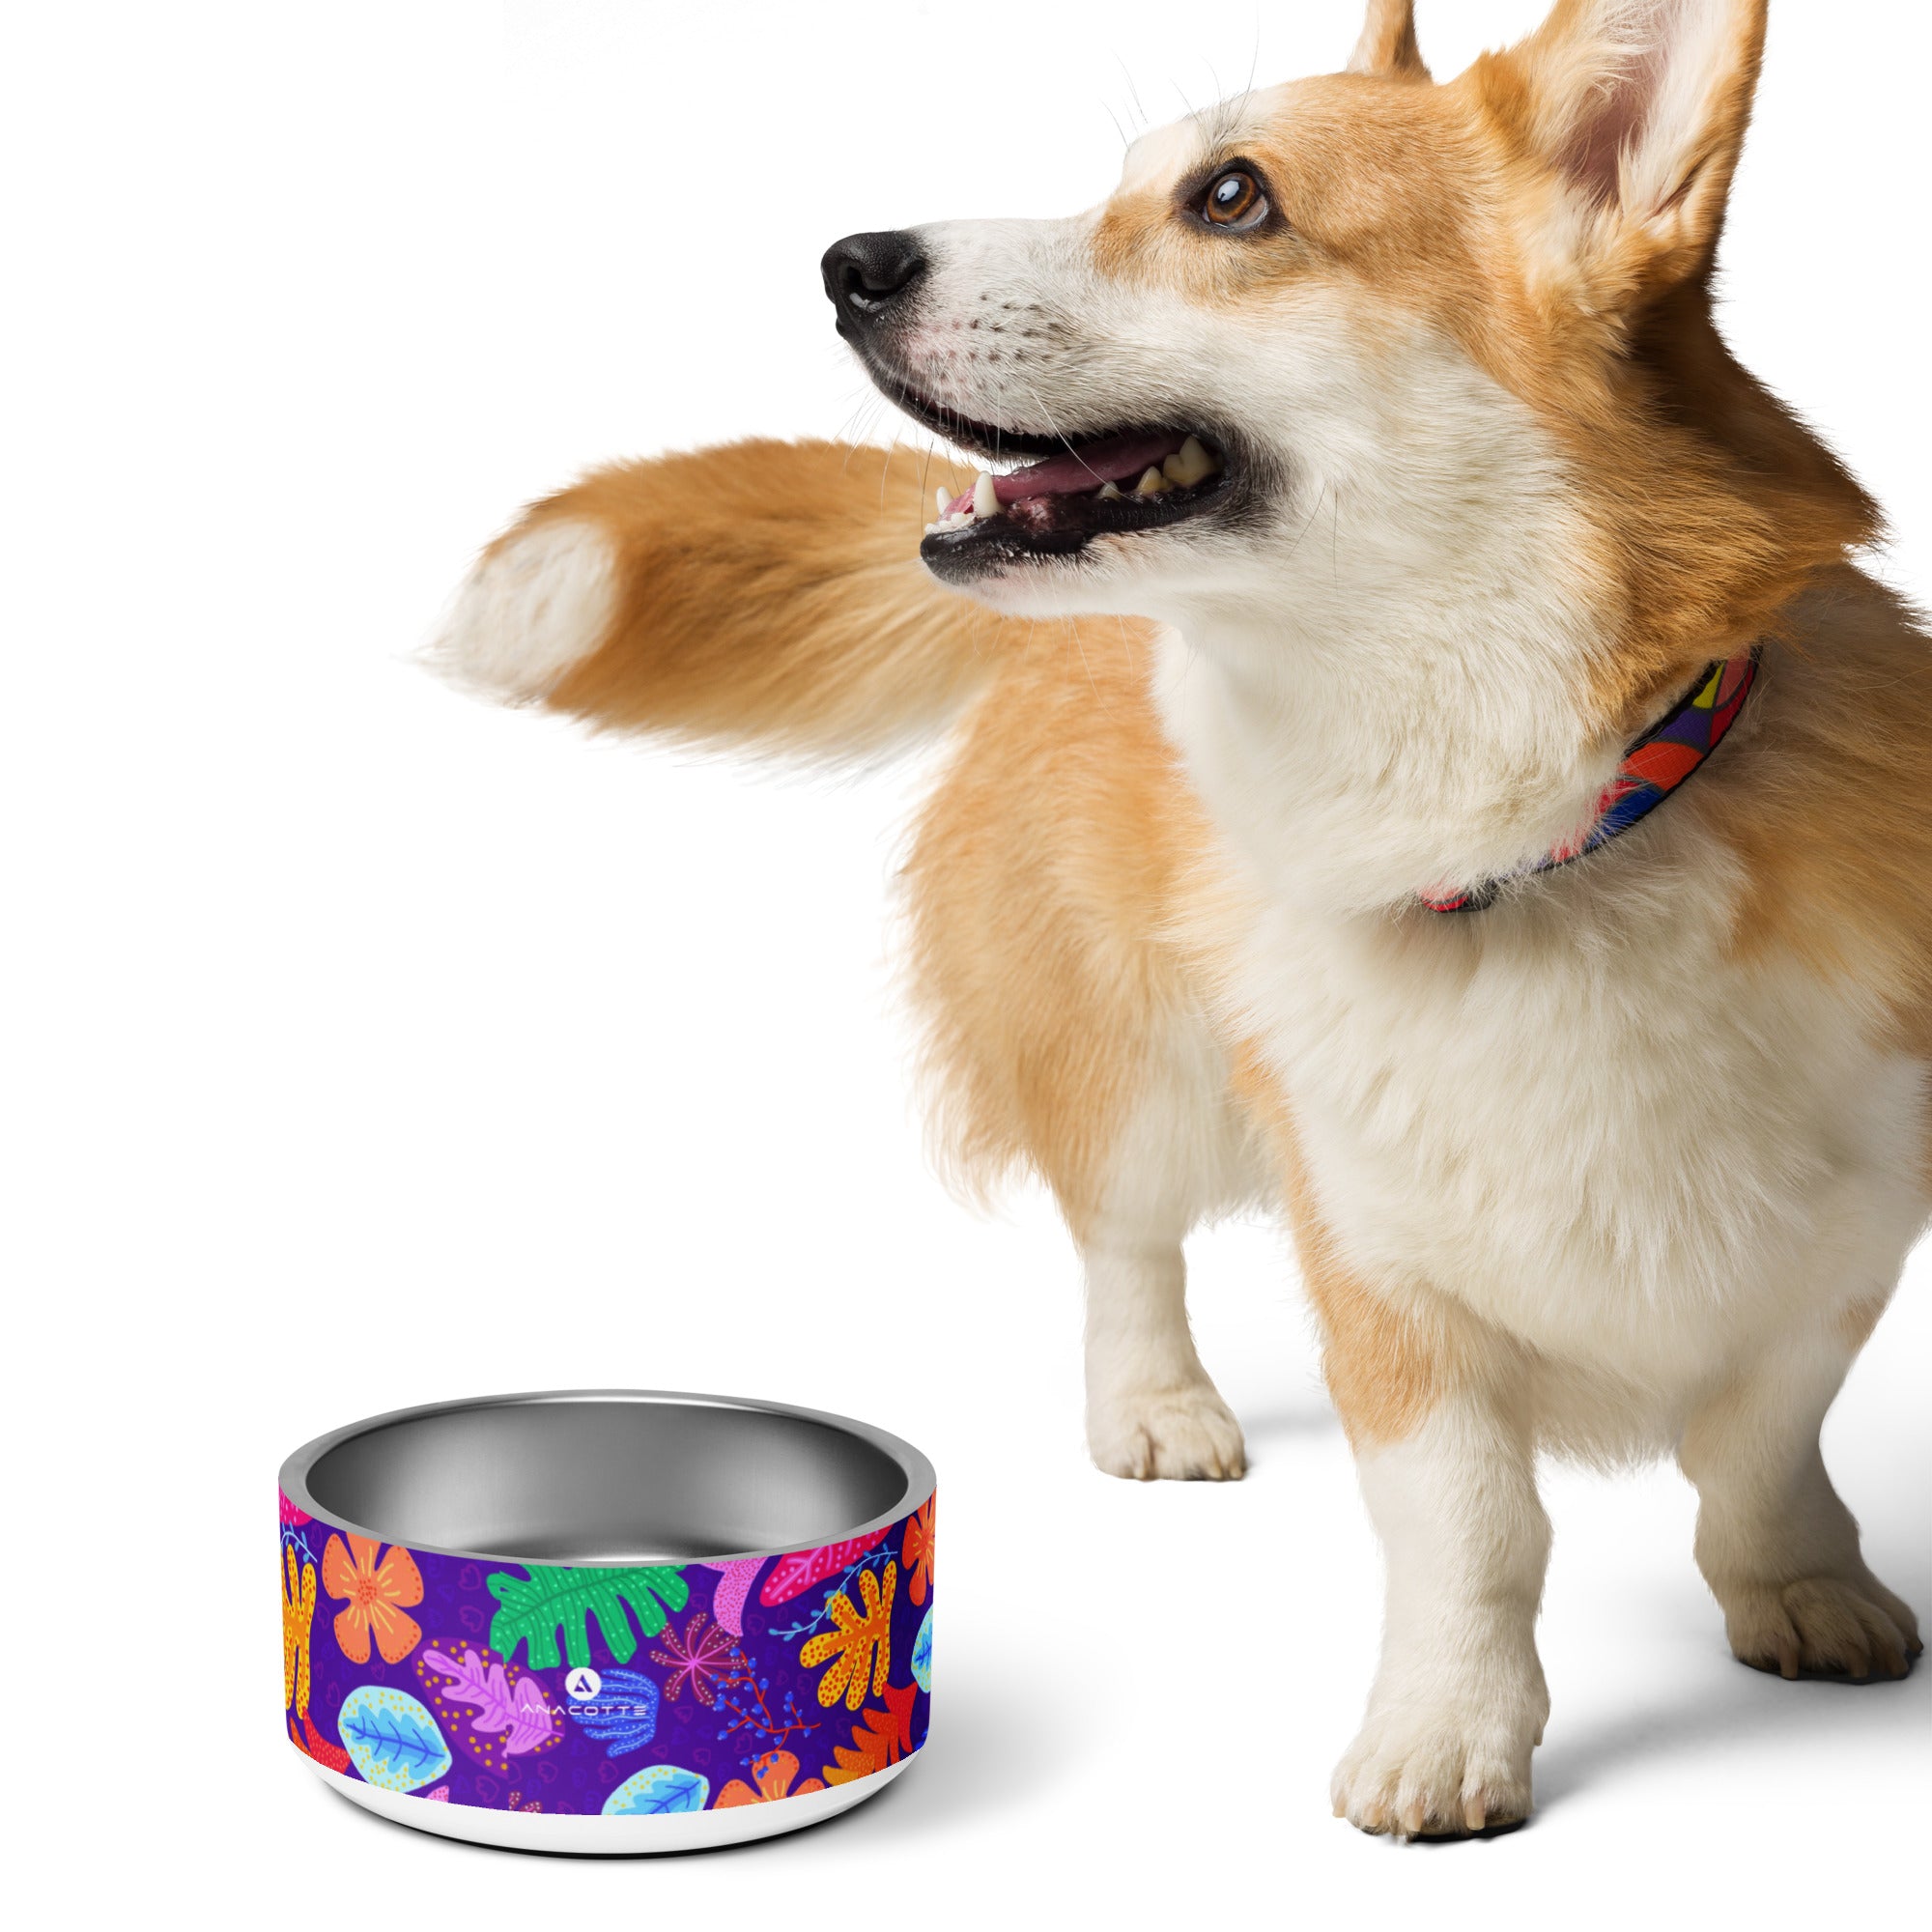 Anacotte Pet Bowl: Made with BPA-Free, Food-Grade Stainless Steel